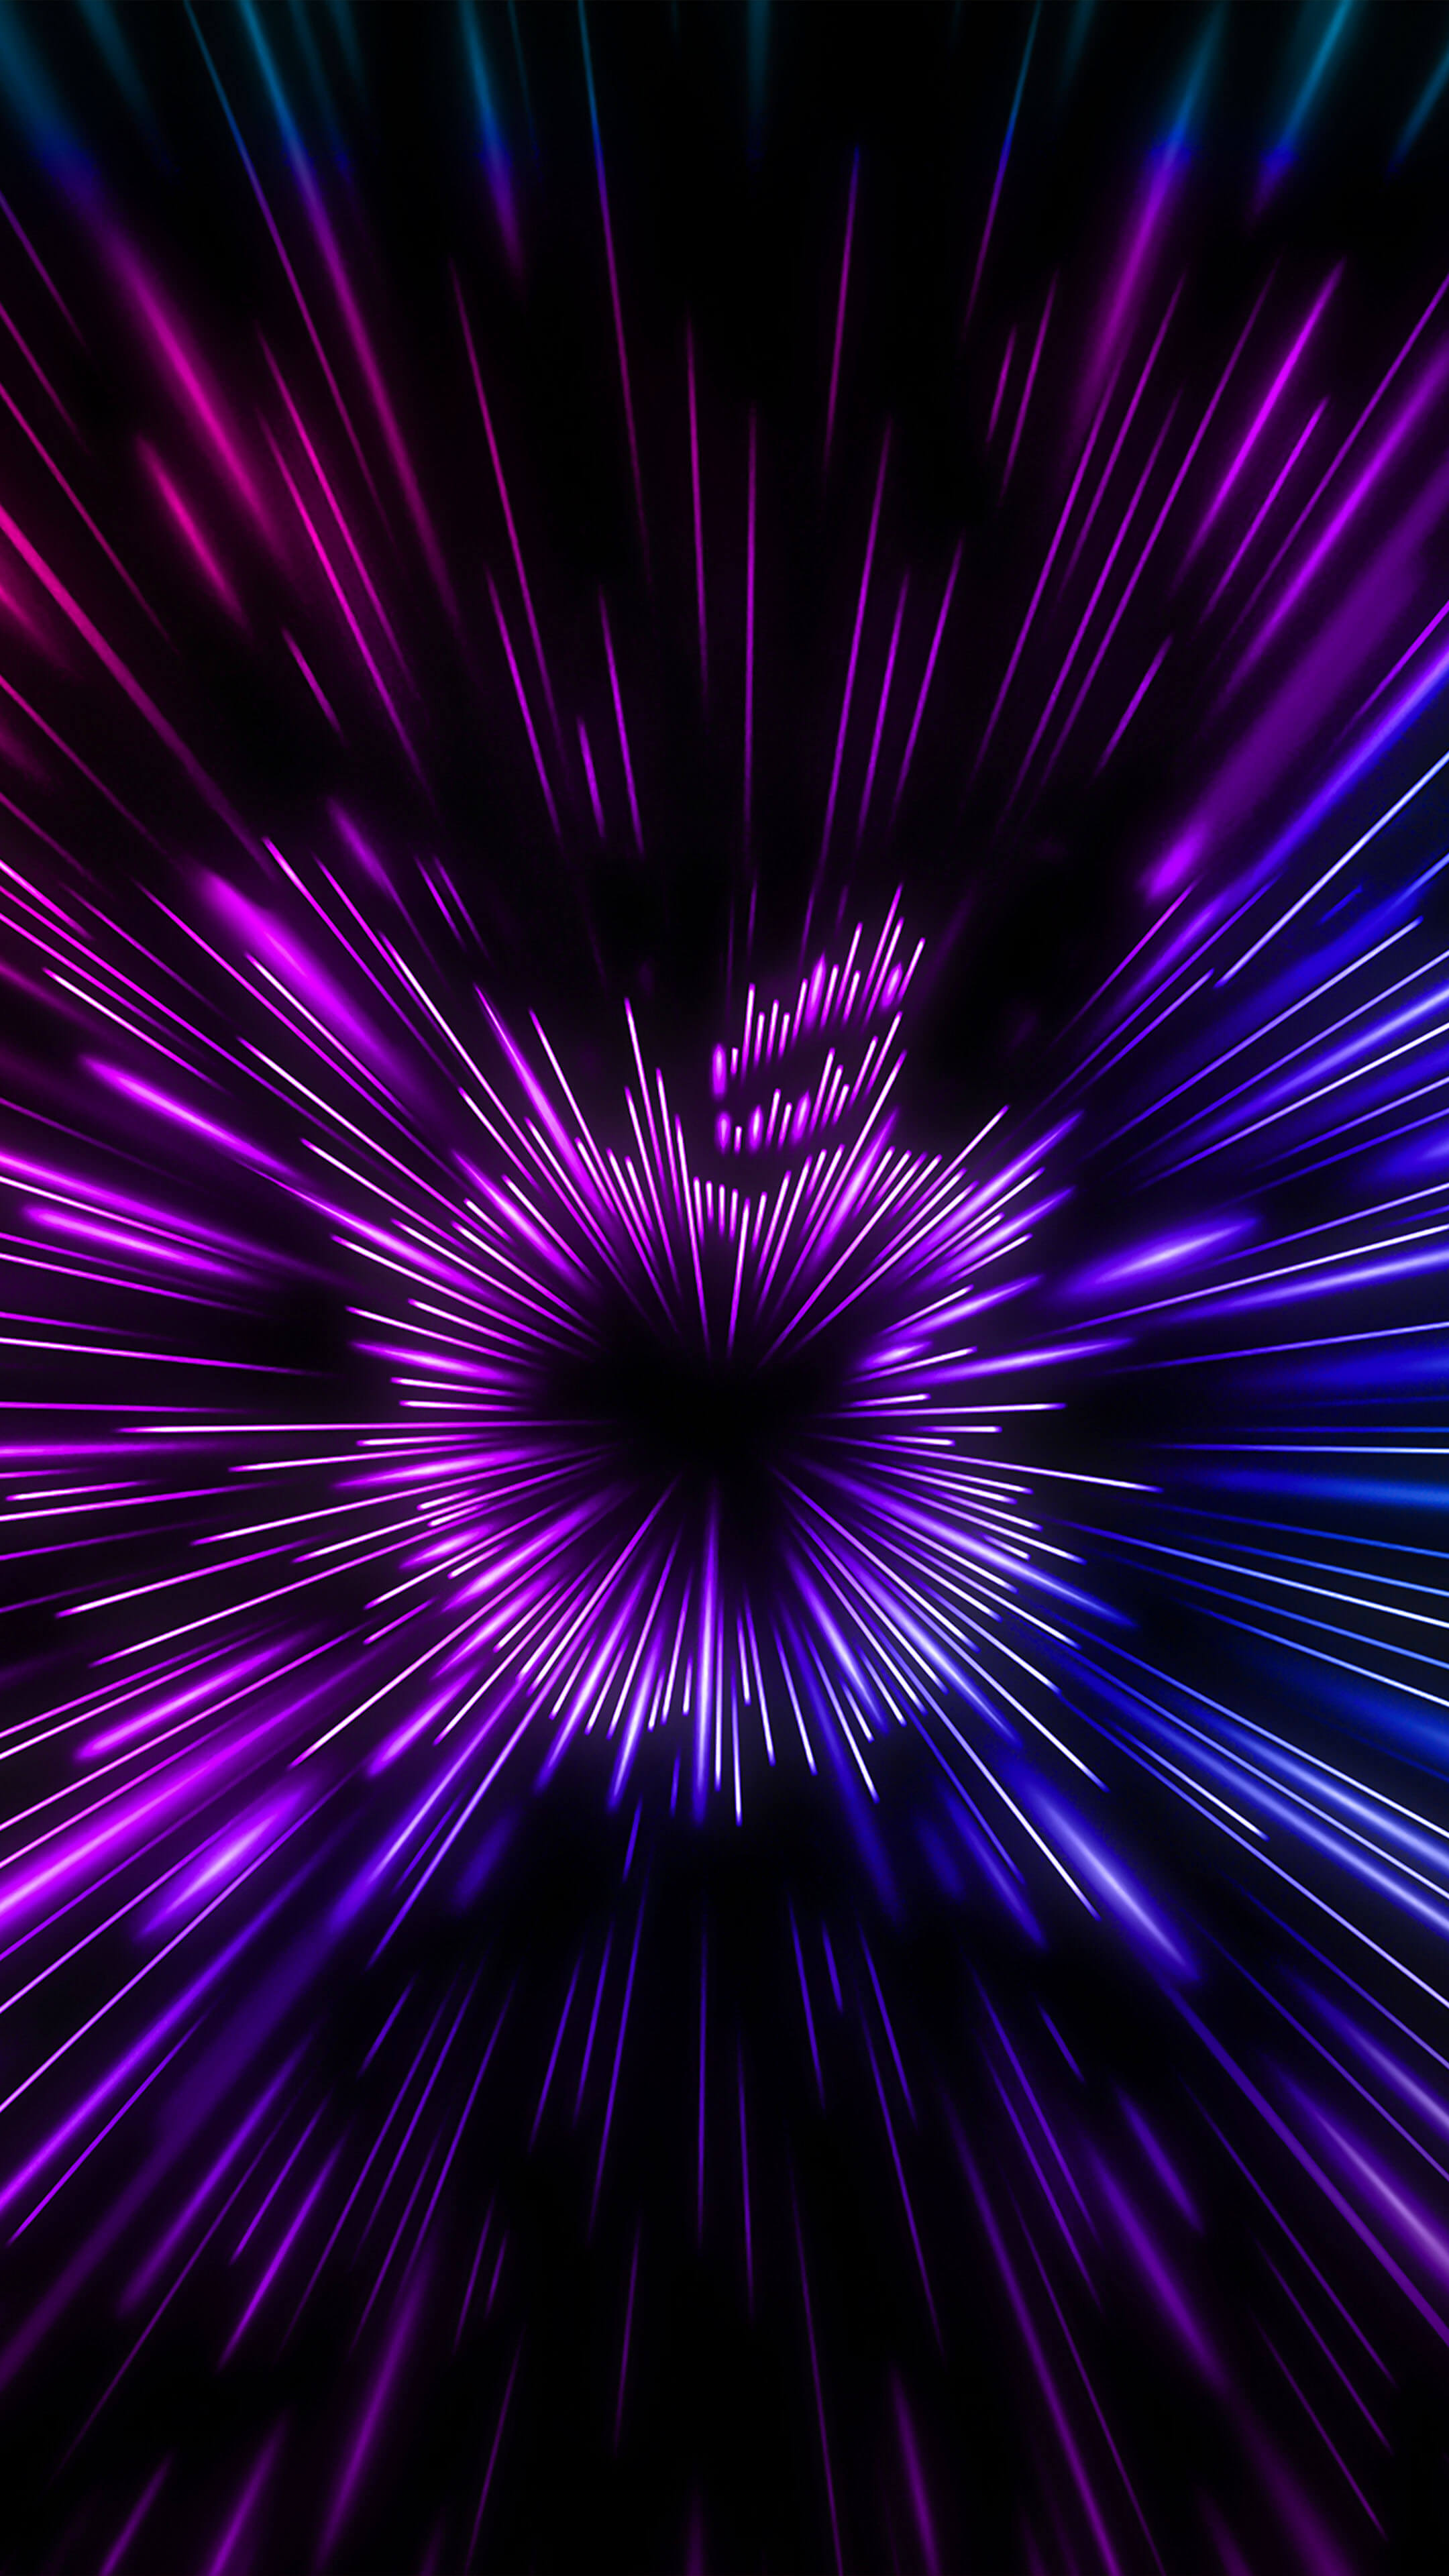 85788 Neon Wallpaper Stock Video Footage  4K and HD Video Clips   Shutterstock